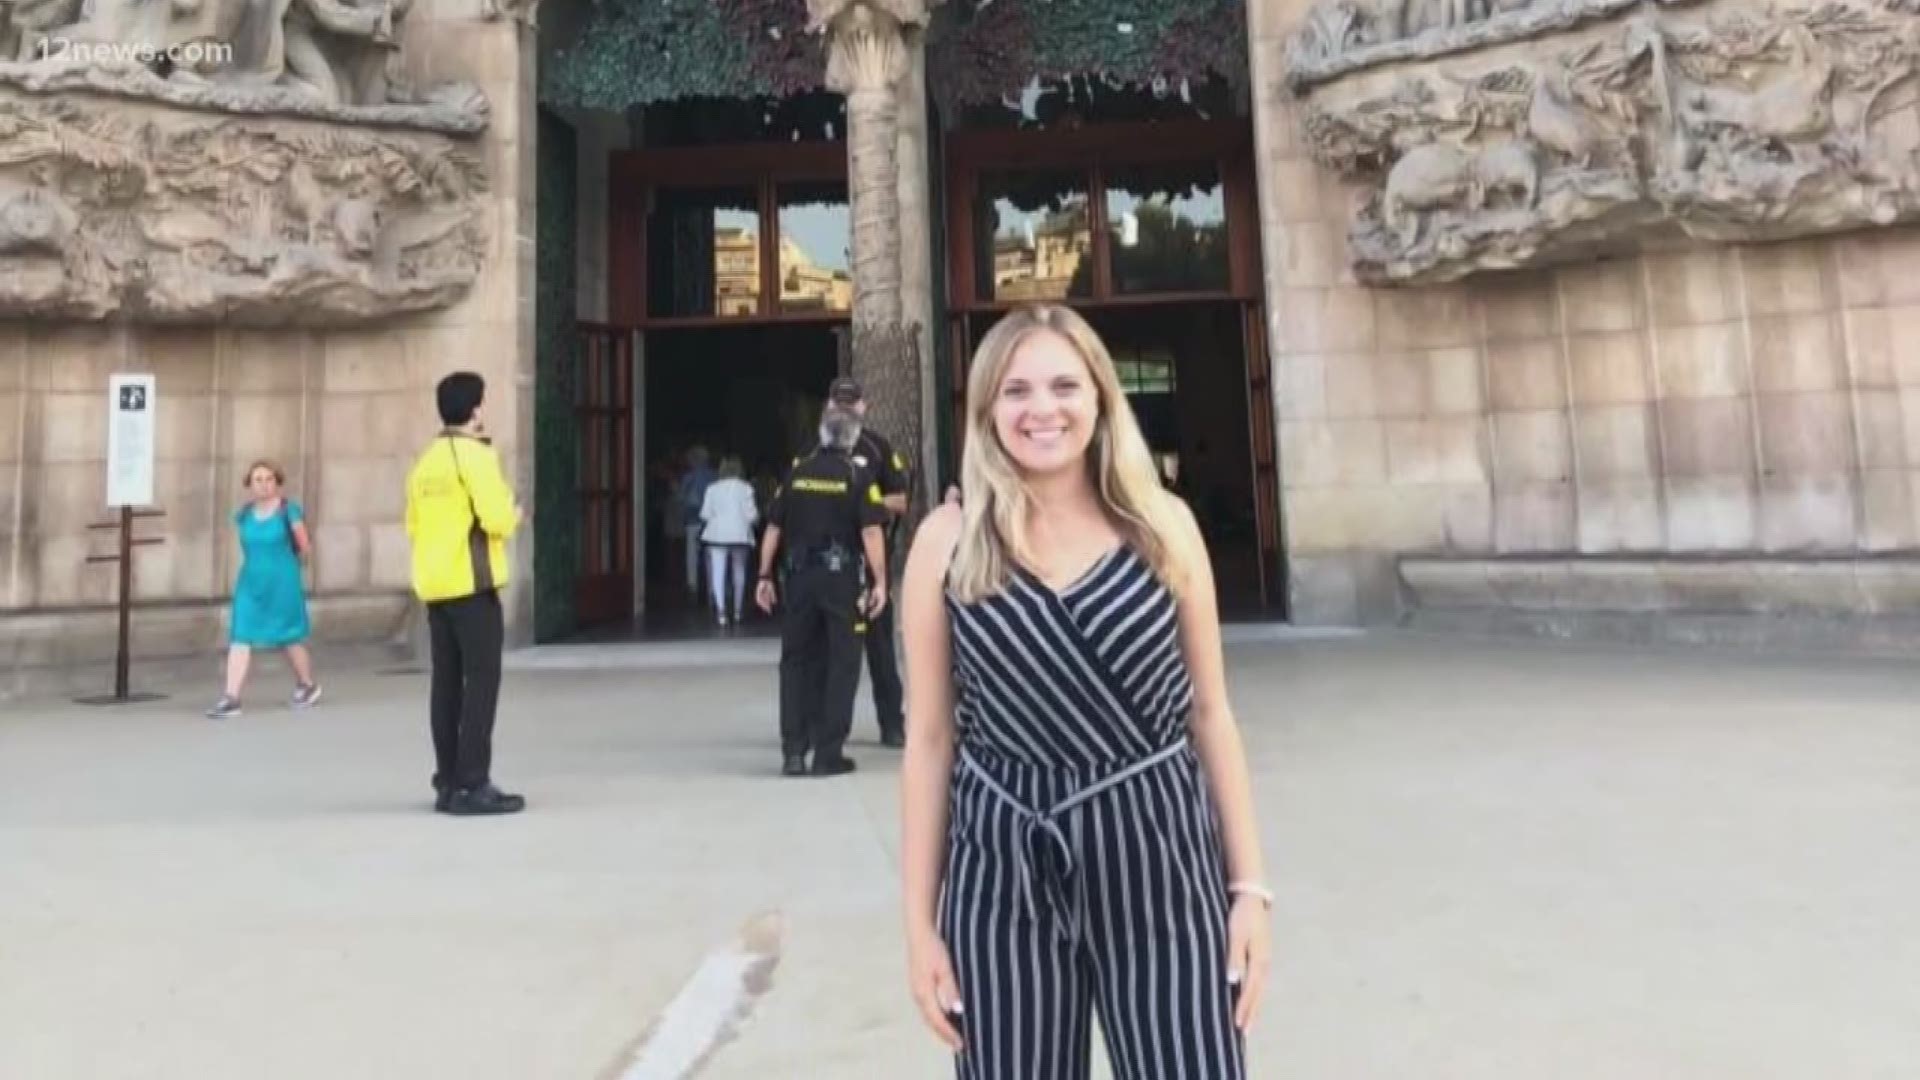 While on vacation in Spain University of Arizona student, Kara Dunn, became paralyzed. She's back home now and speaking out about her recovery.